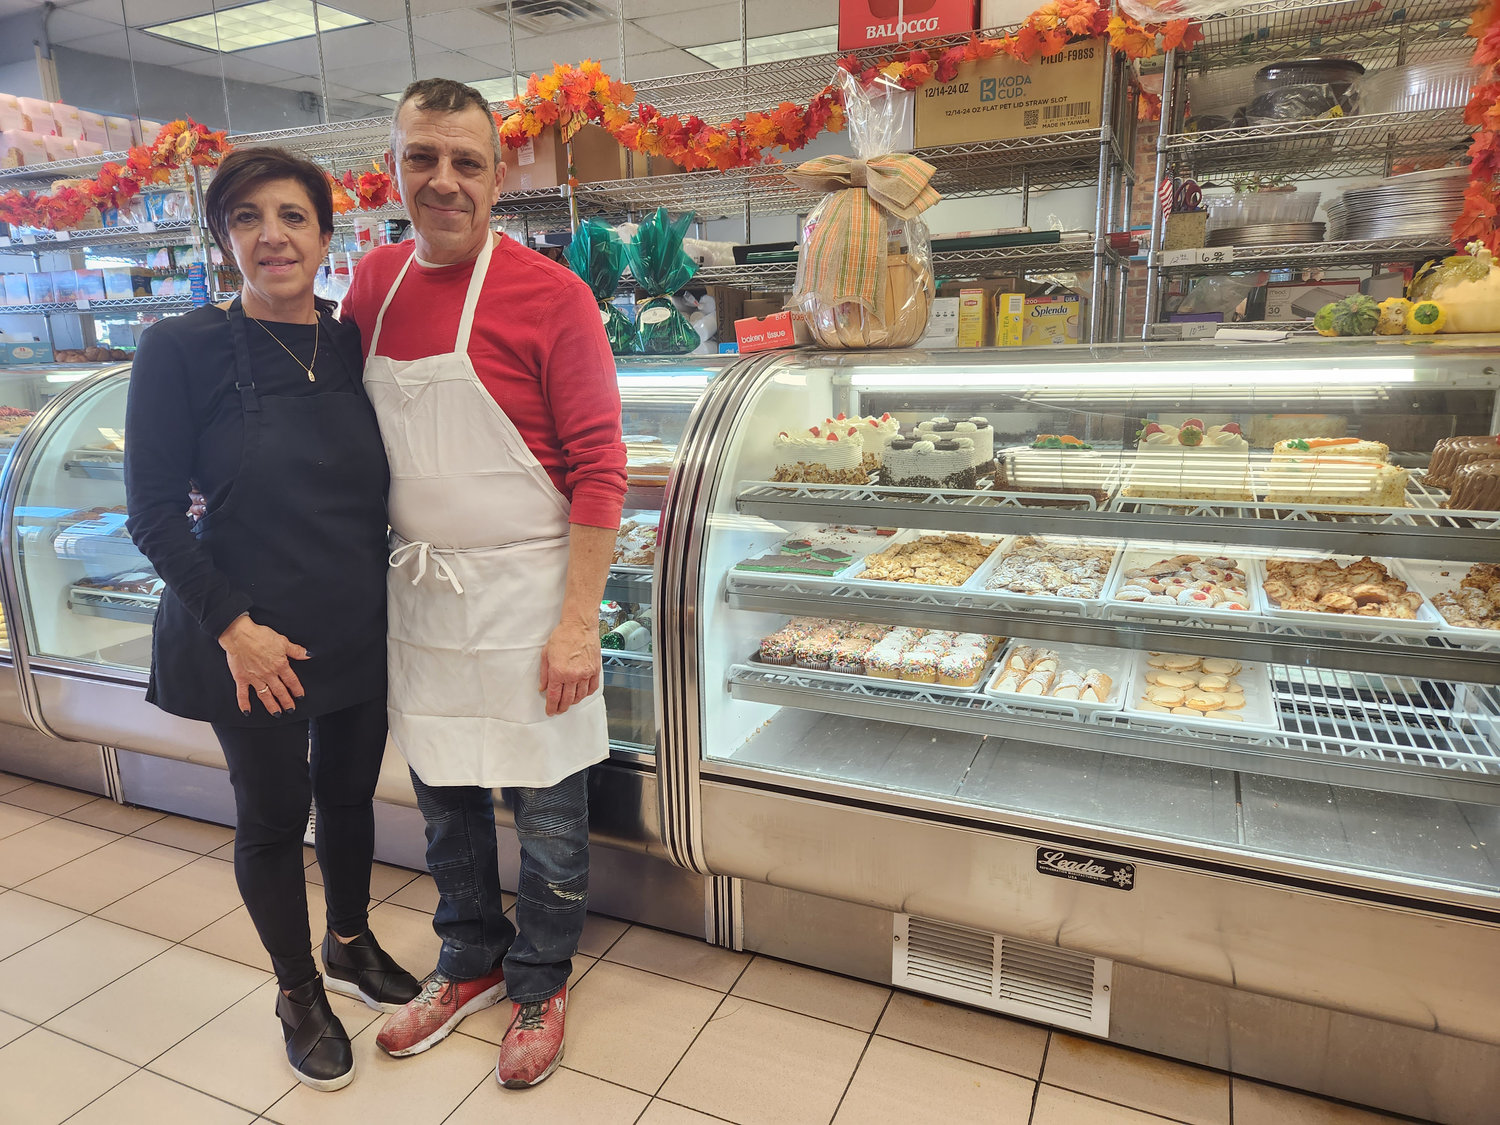 Sister-and-brother team Rose and Joseph Mannino took over the bakery after their father passed away. They bake pastries using recipes that have been in their family for more than 100 years.